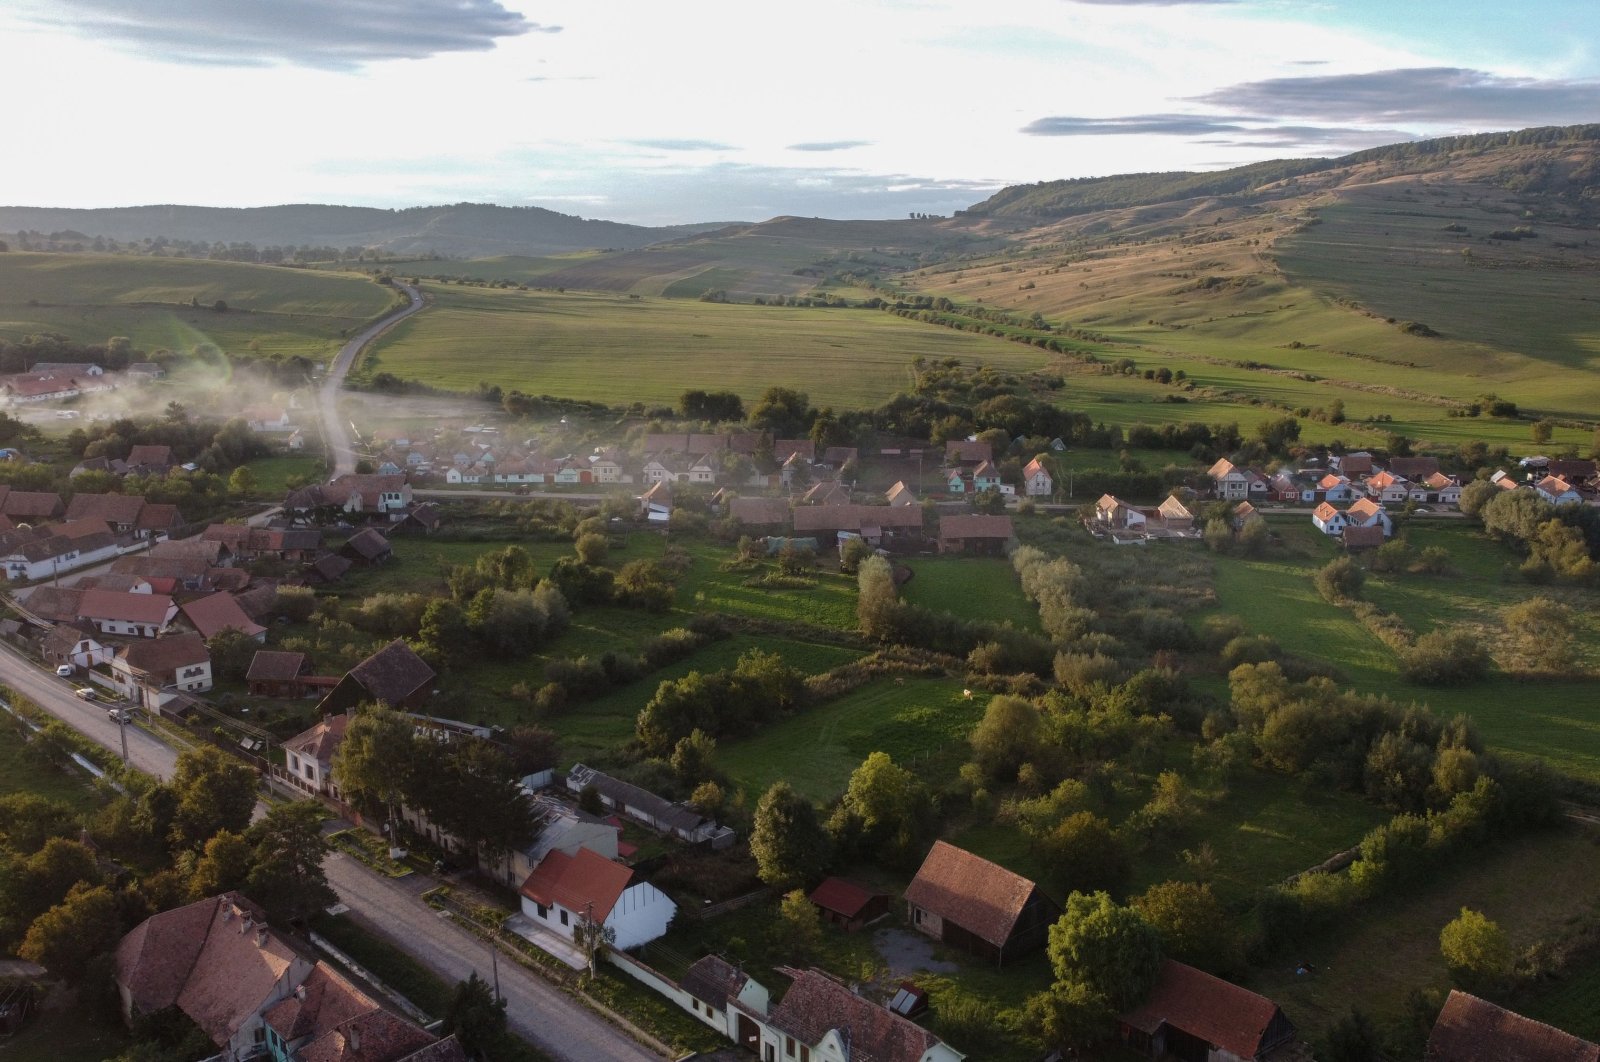 An aerial view shows the village of Viscri, where King Charles III stays when he visits the area, in Transylvania, central Romania, Sept. 15, 2022. (AFP Photo)